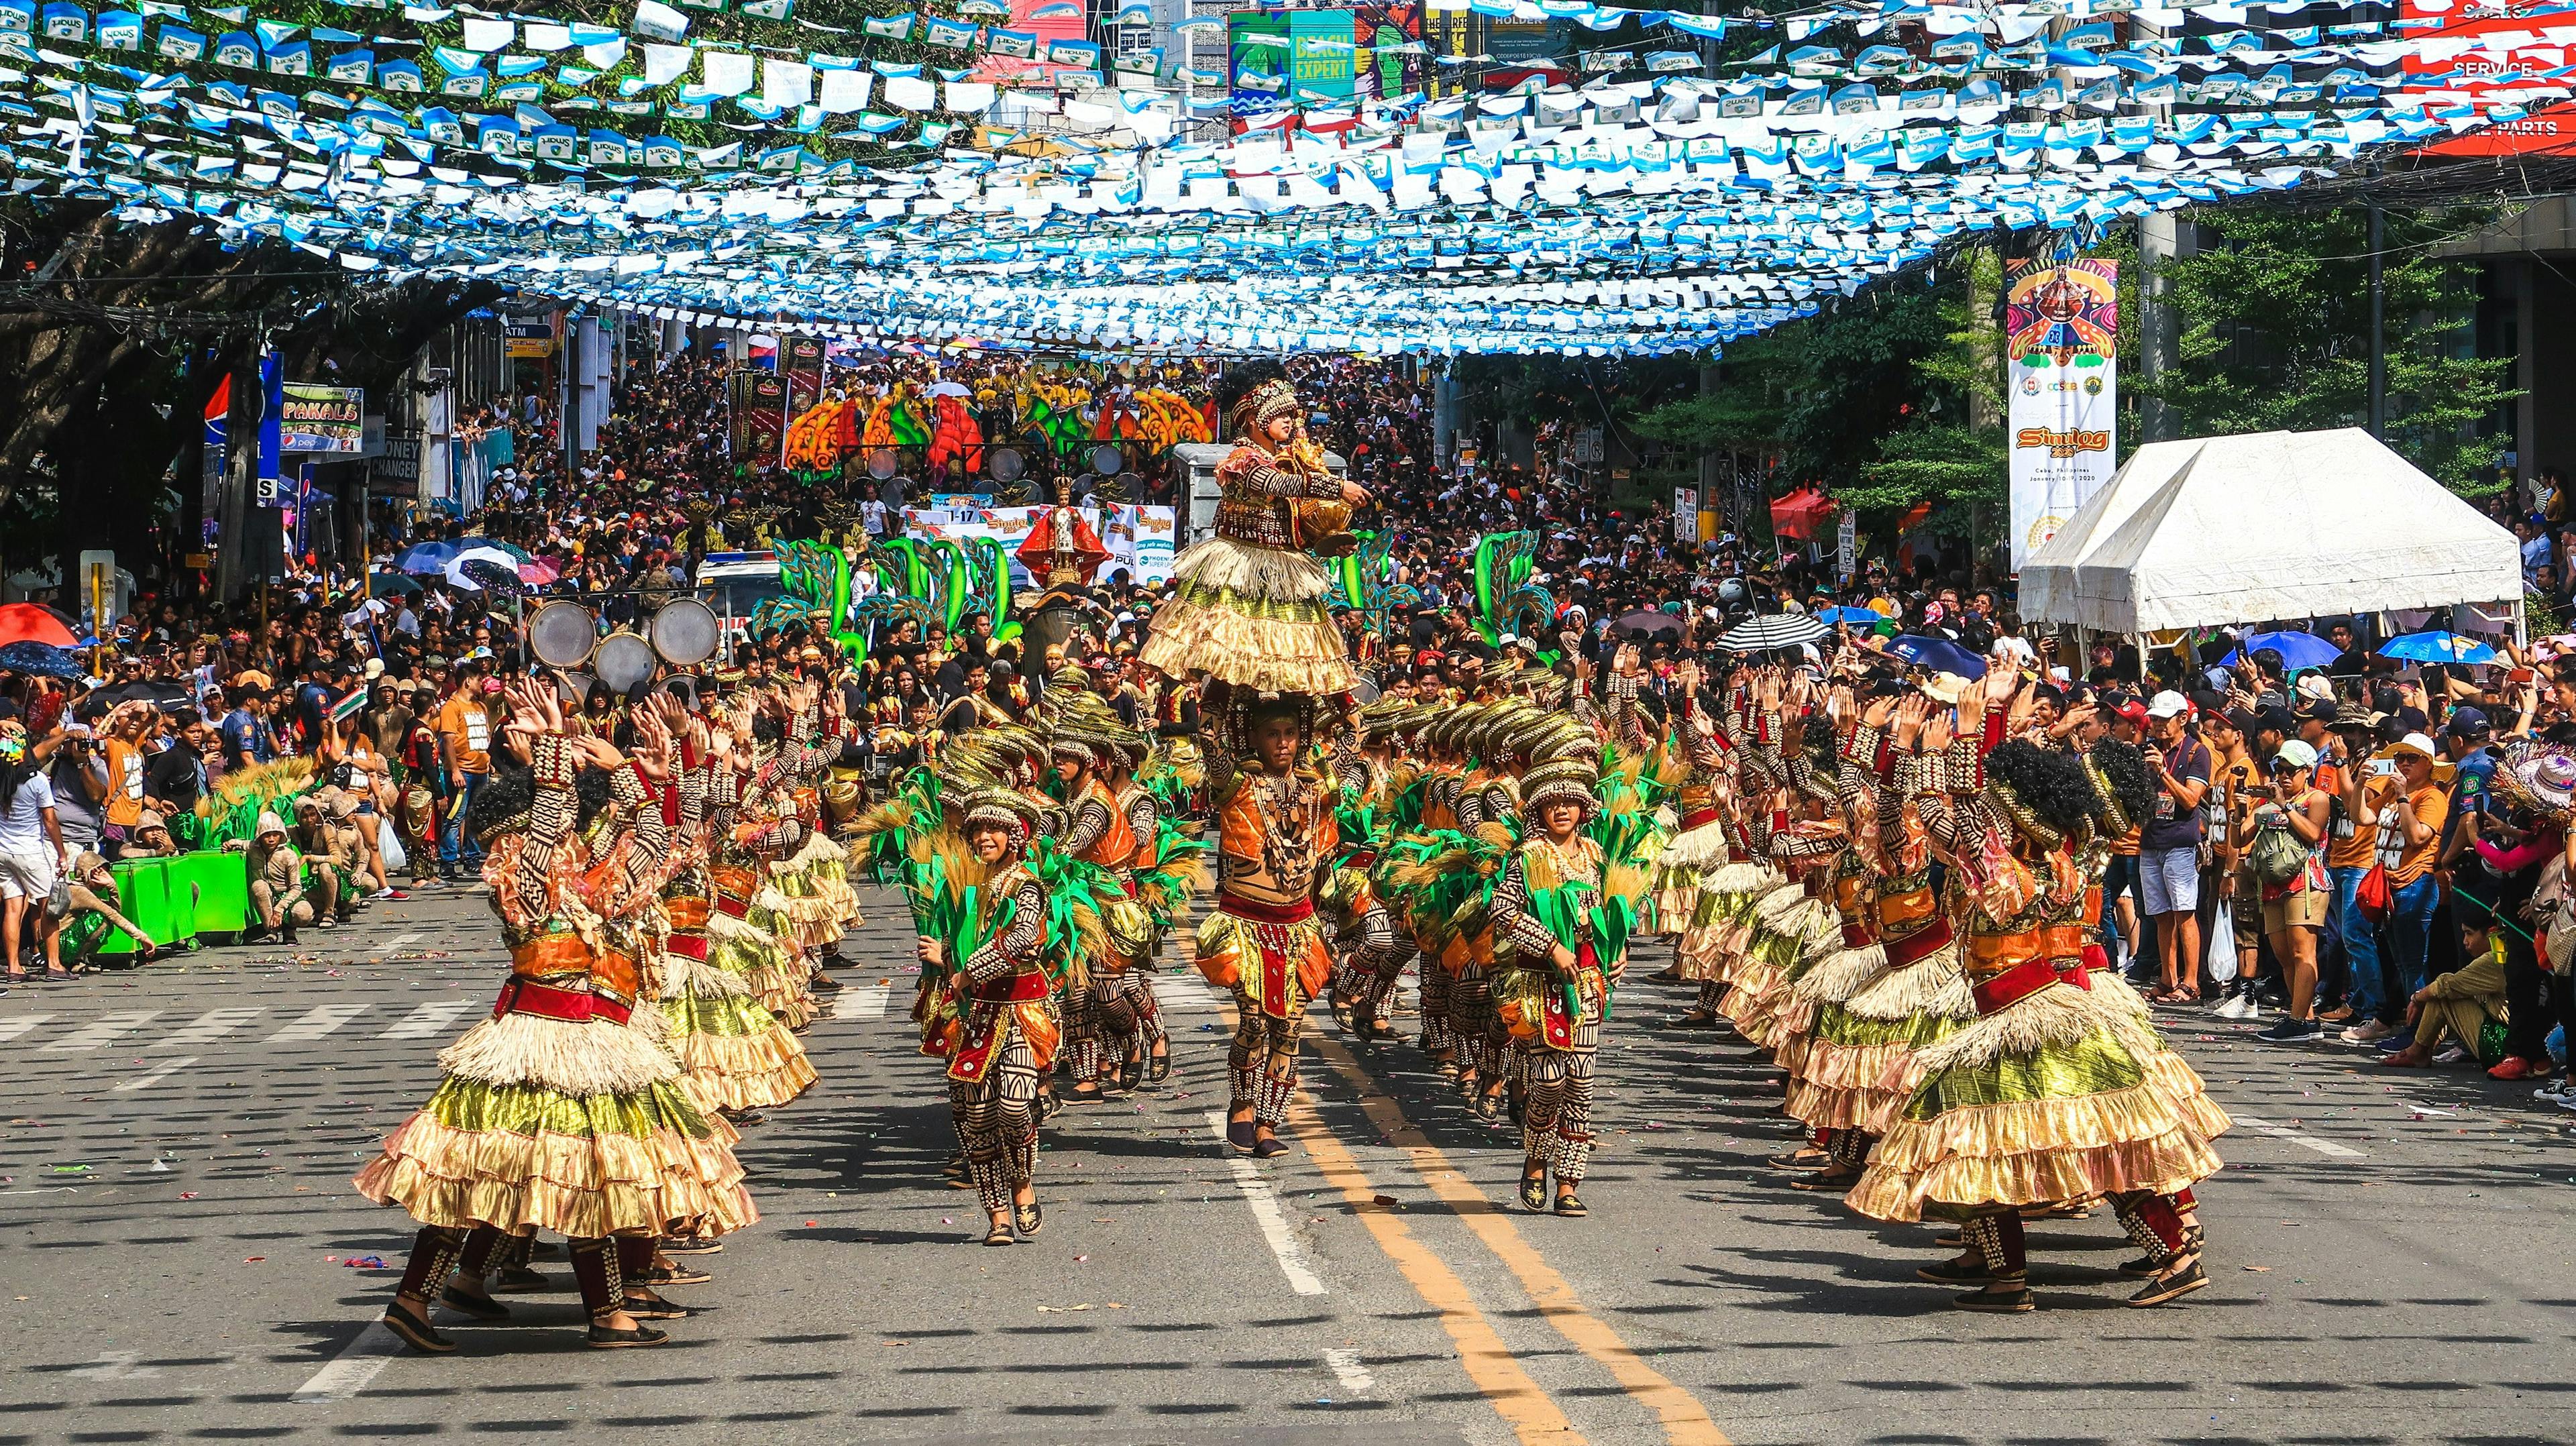 Locals dancing on the street in Sinulog Festival in Cebu Philippines.